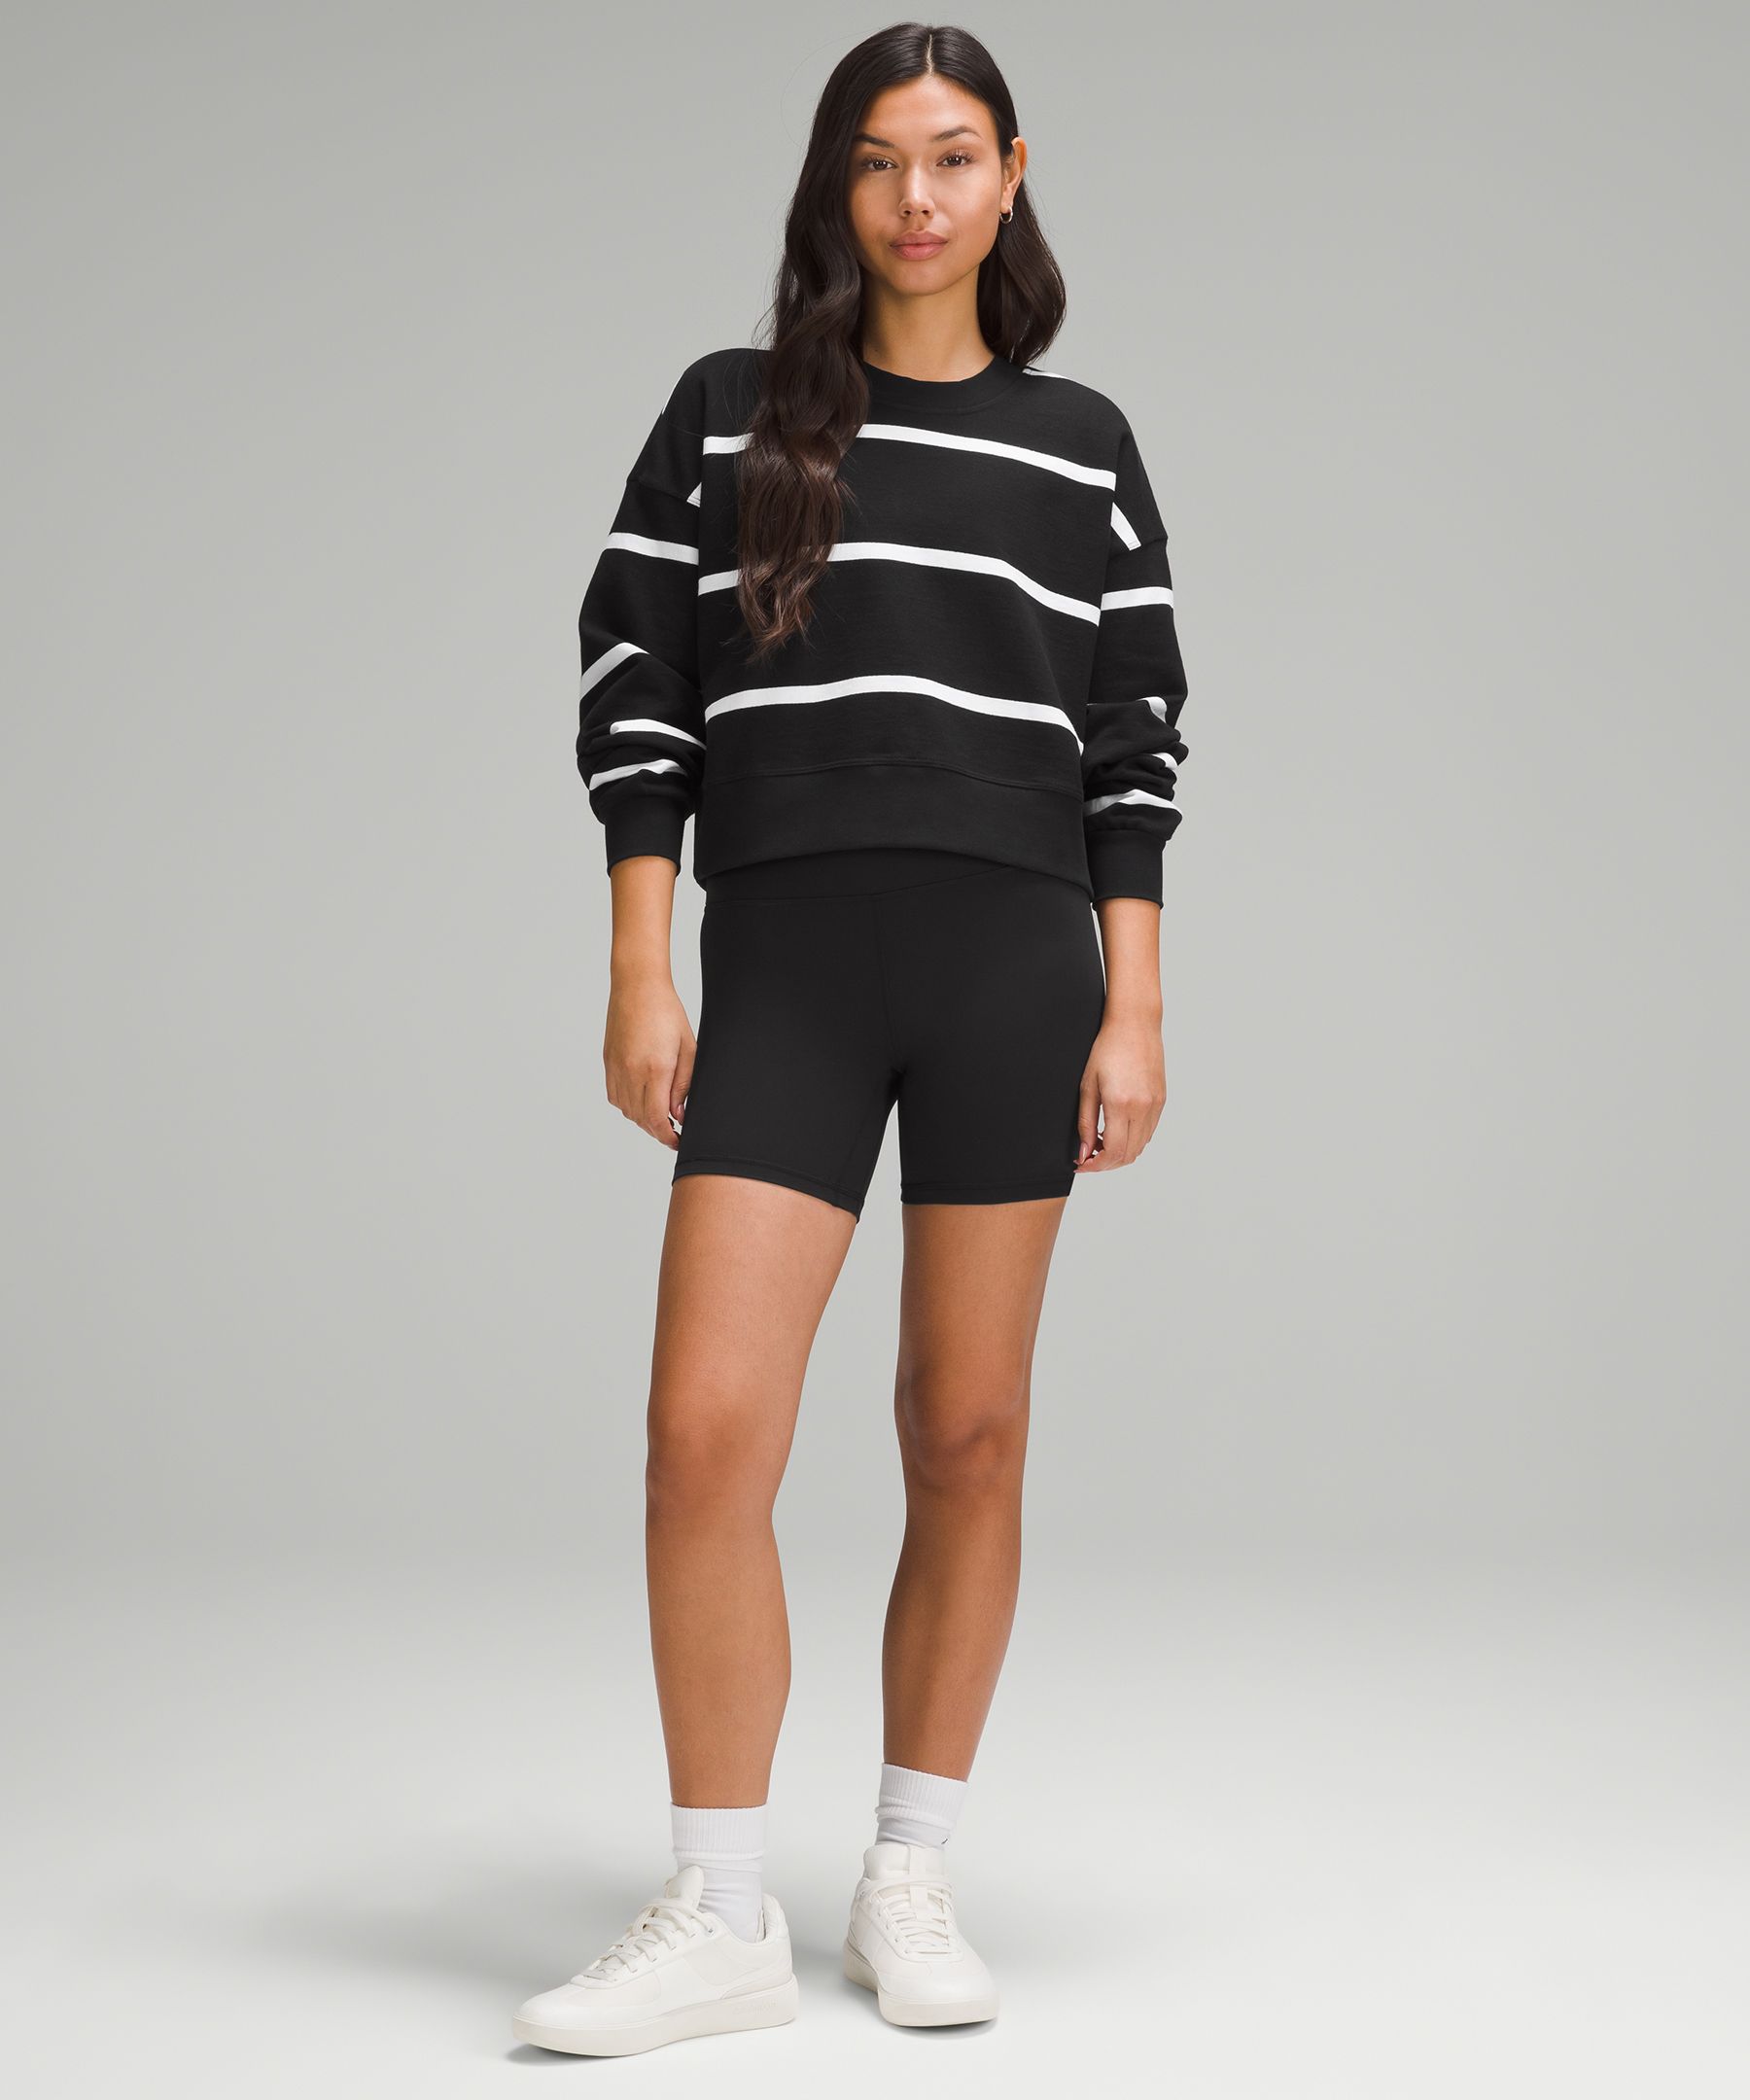 lululemon Australia and New Zealand - Your favourite layer, now cropped.  Post-practice comfort perfected with the Perfectly Oversized Cropped Crew,  in soft, textured cotton-blend fabric and a relaxed fit. ⁠Also available in